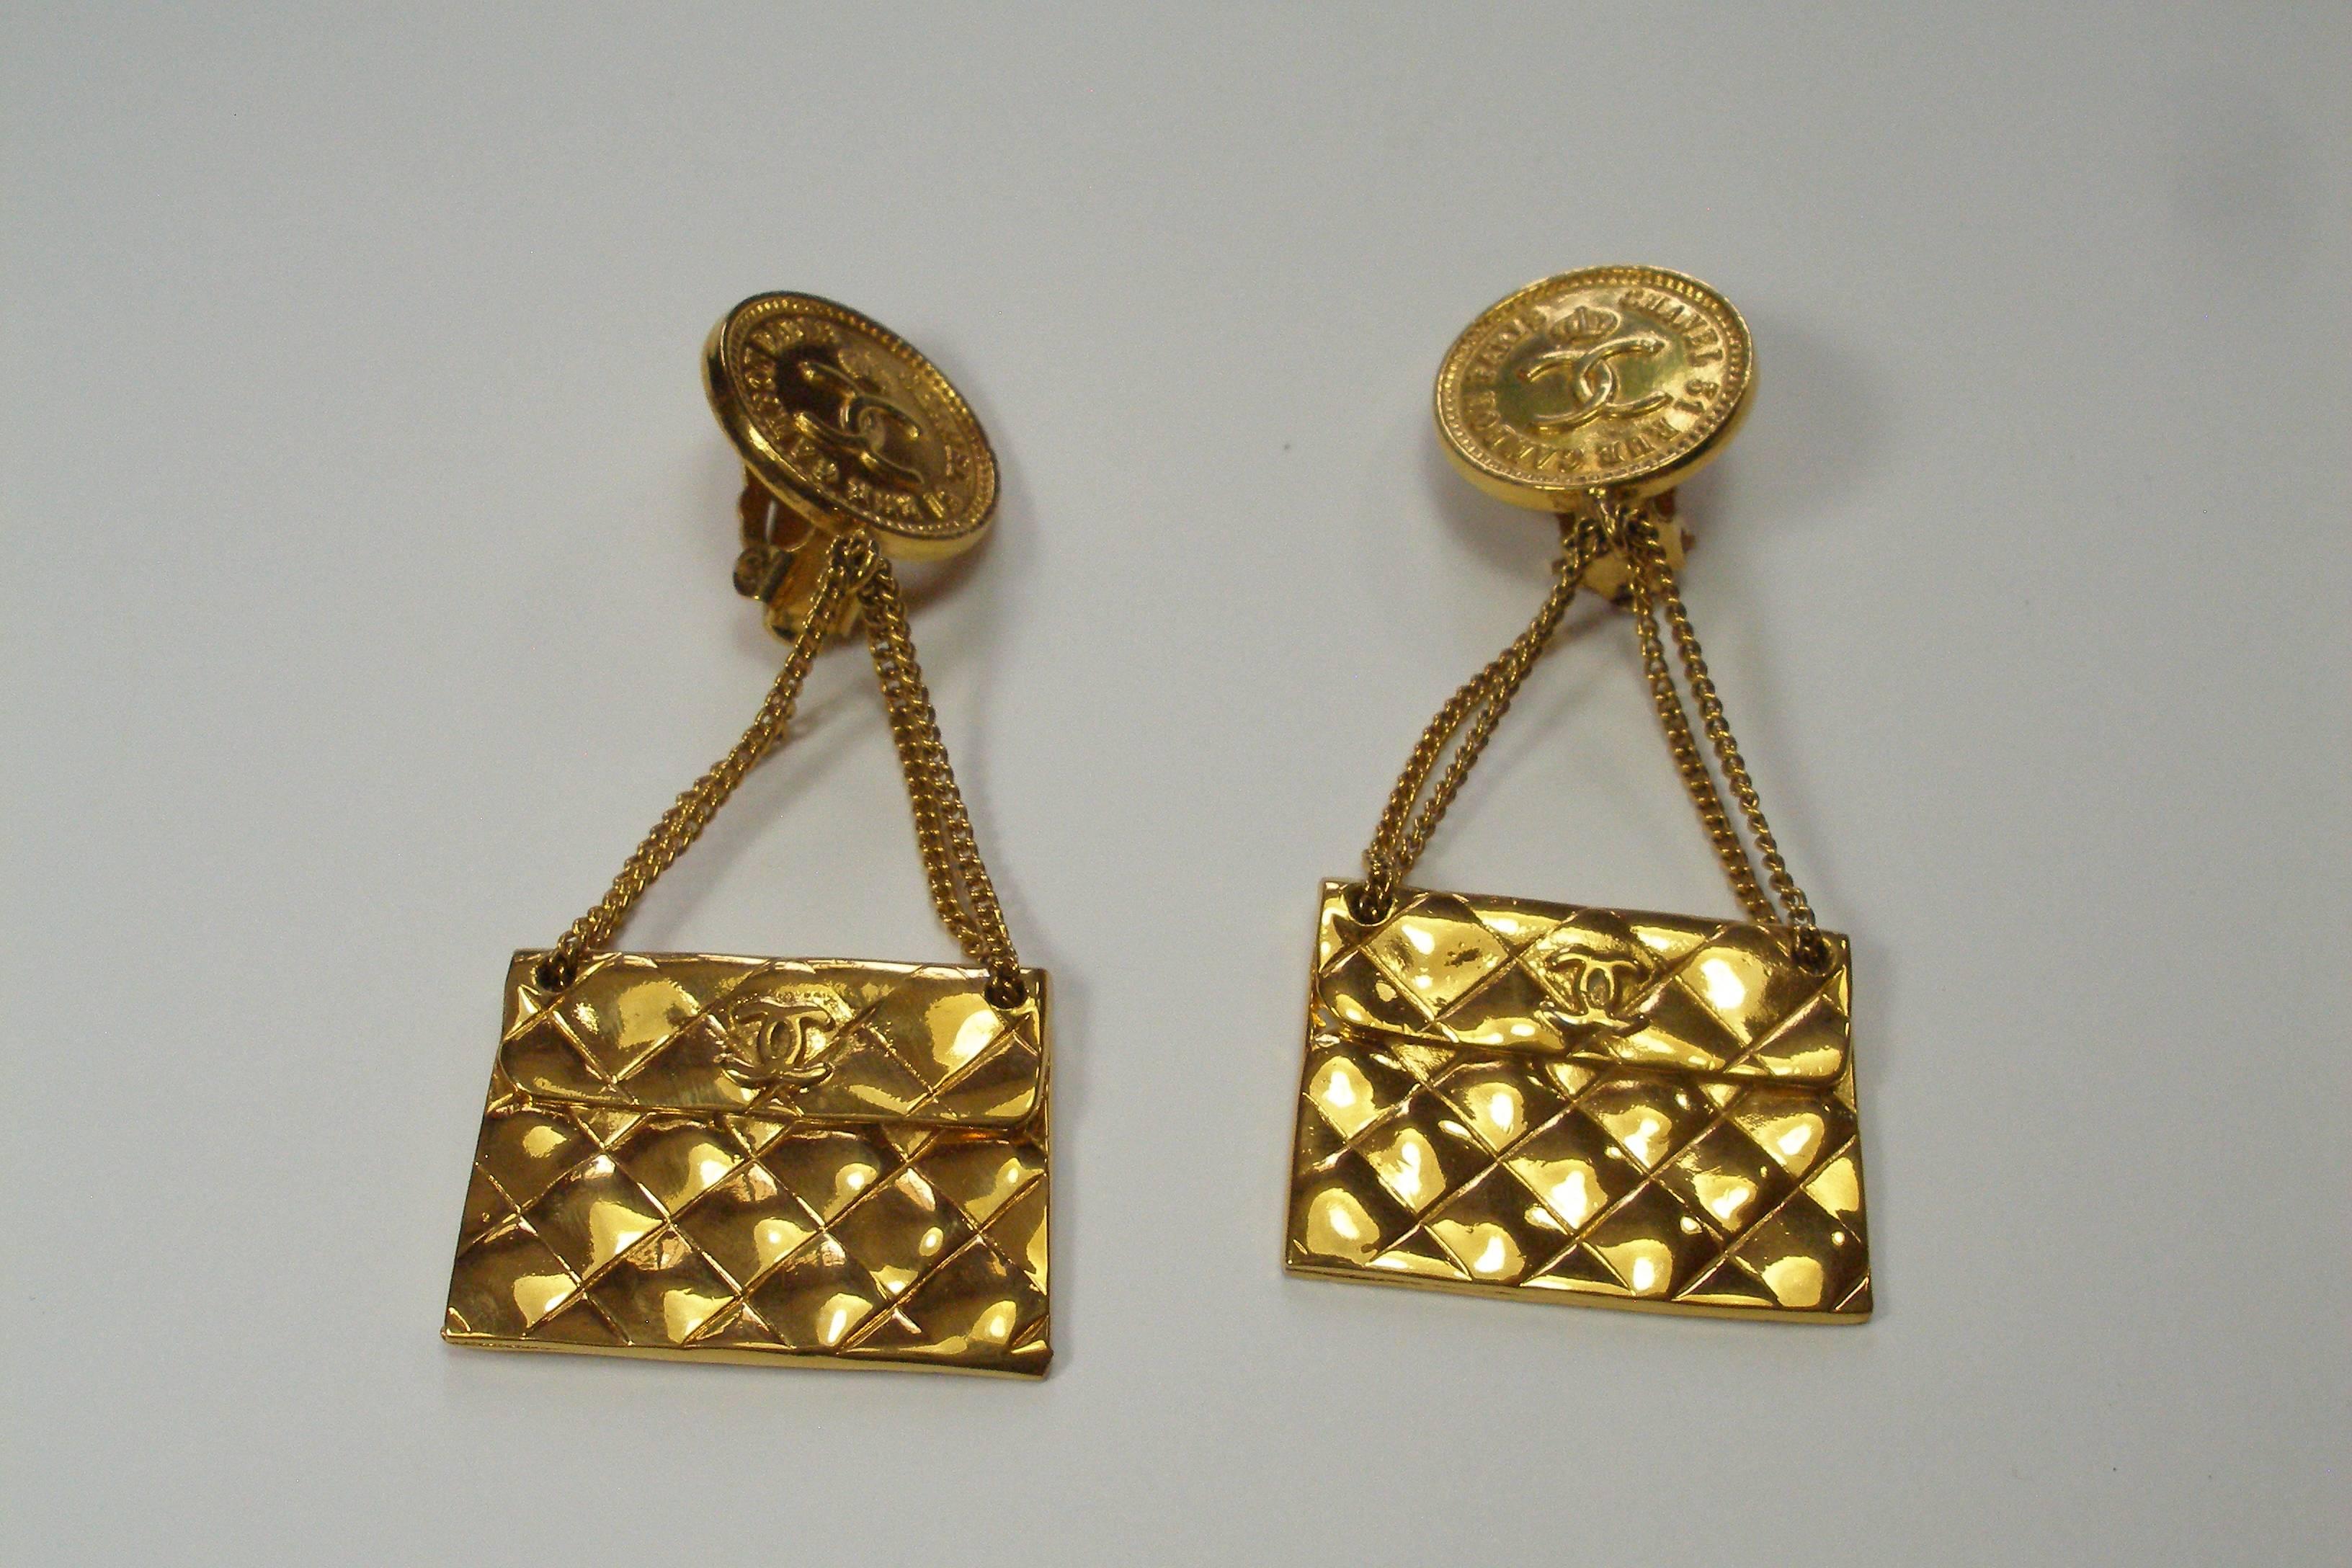 Fantastic quality and design as you would expect from the House of Chanel. A chance to own your own piece of this iconic brand and look bang en trend and elegant all at the same tim
This earrings are in good condition and each one measures approx.